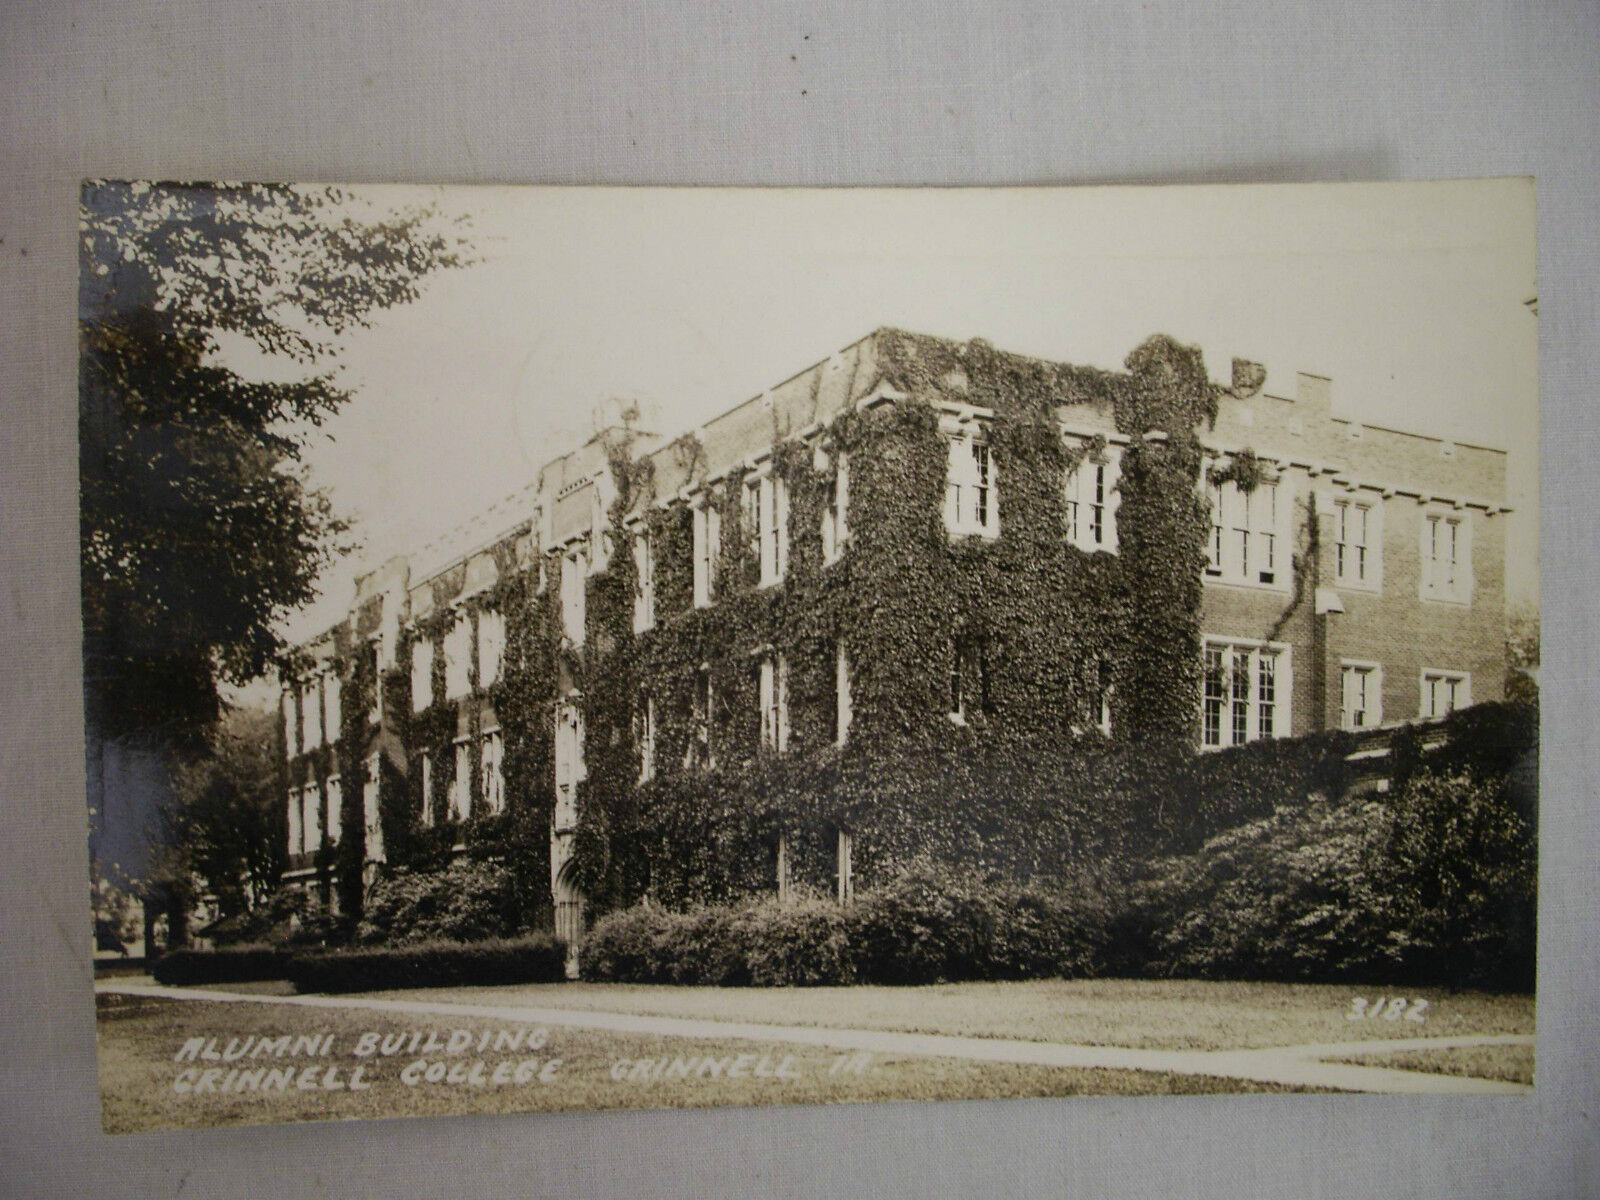 VINTAGE RPPC IVY-COVERED ALUMNI BUILDING GRINNELL COLLEGE GRINNELL IOWA 1942